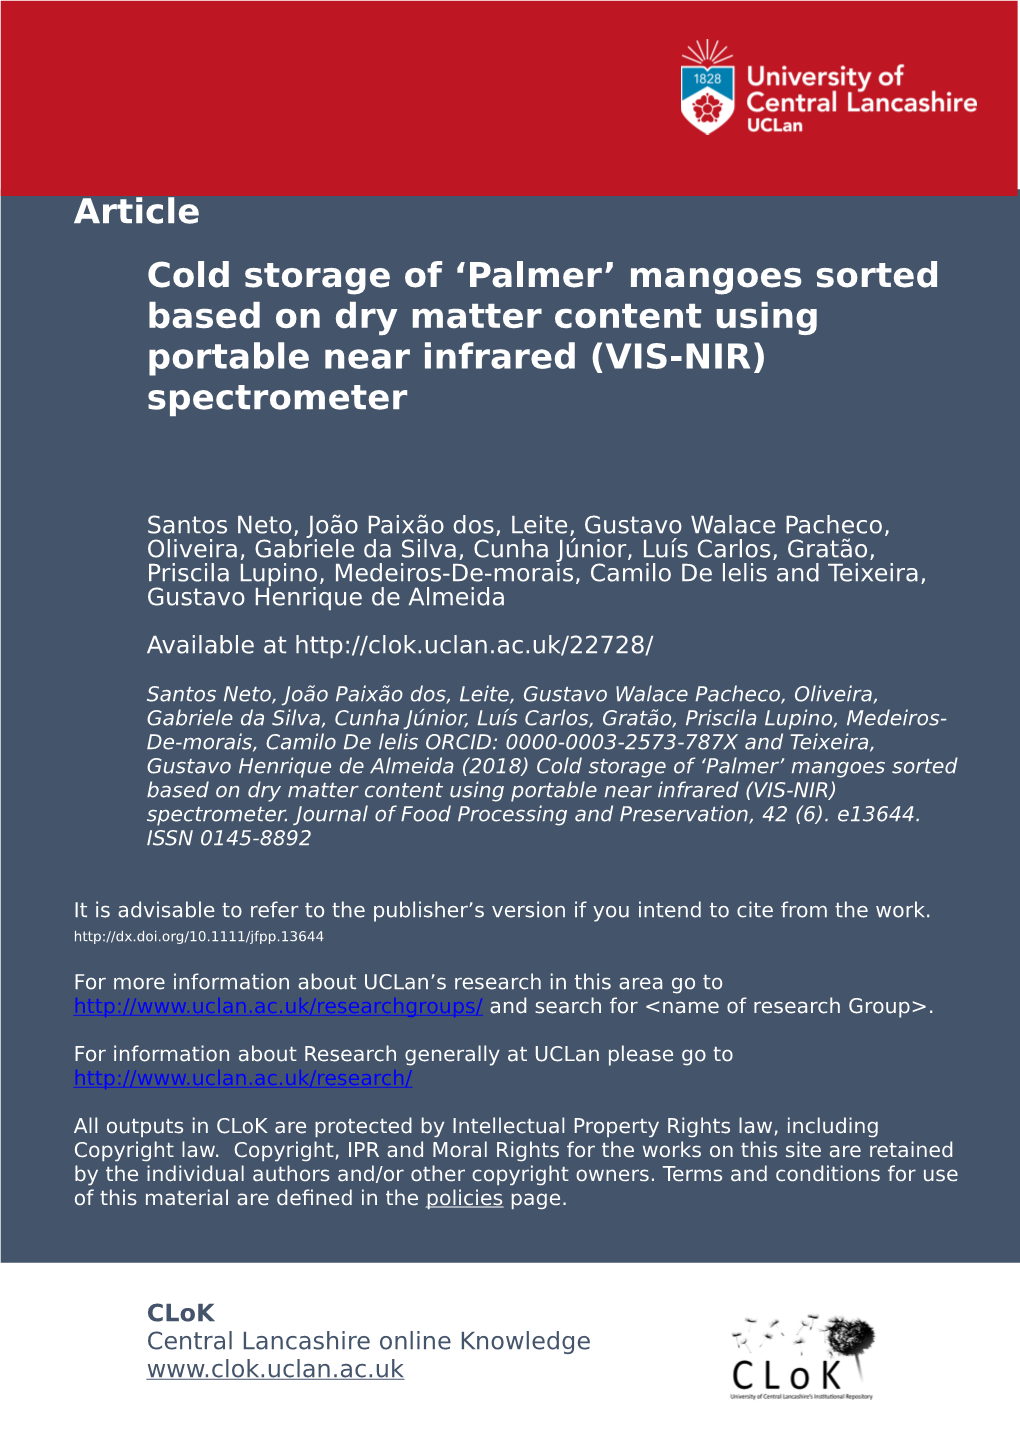 Cold Storage of 'Palmer' Mangoes Sorted Based on Dry Matter Content